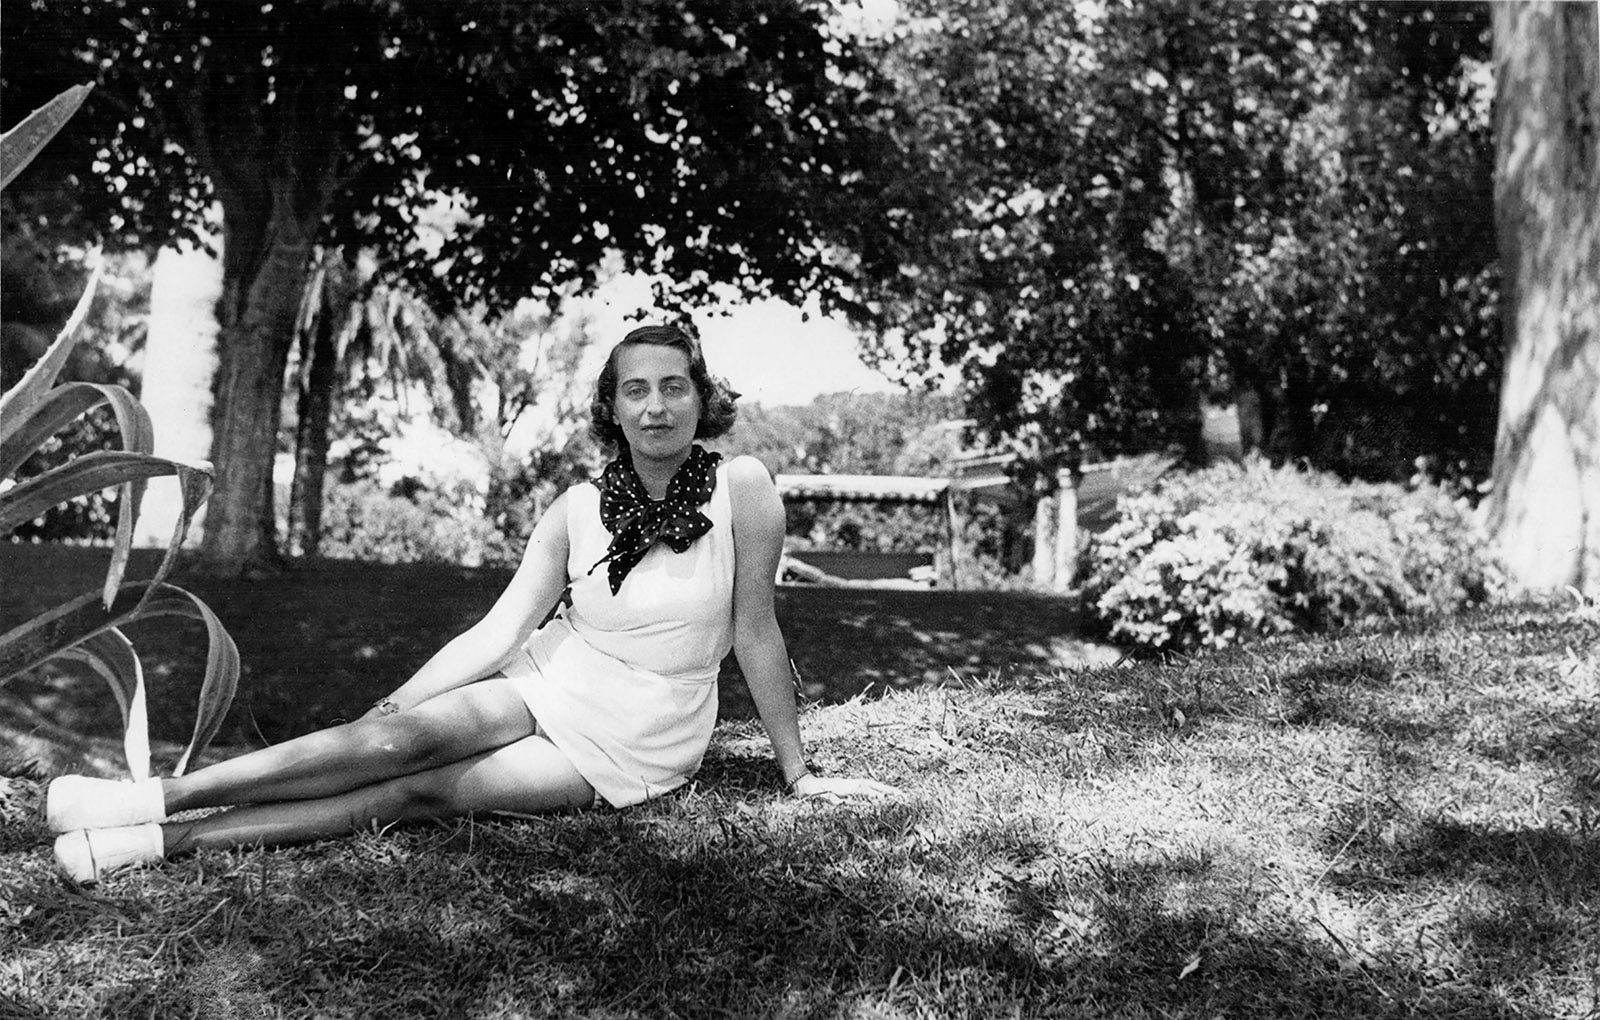 Silvina Ocampo at her family’s summer home near Buenos Aires, 1933–1934